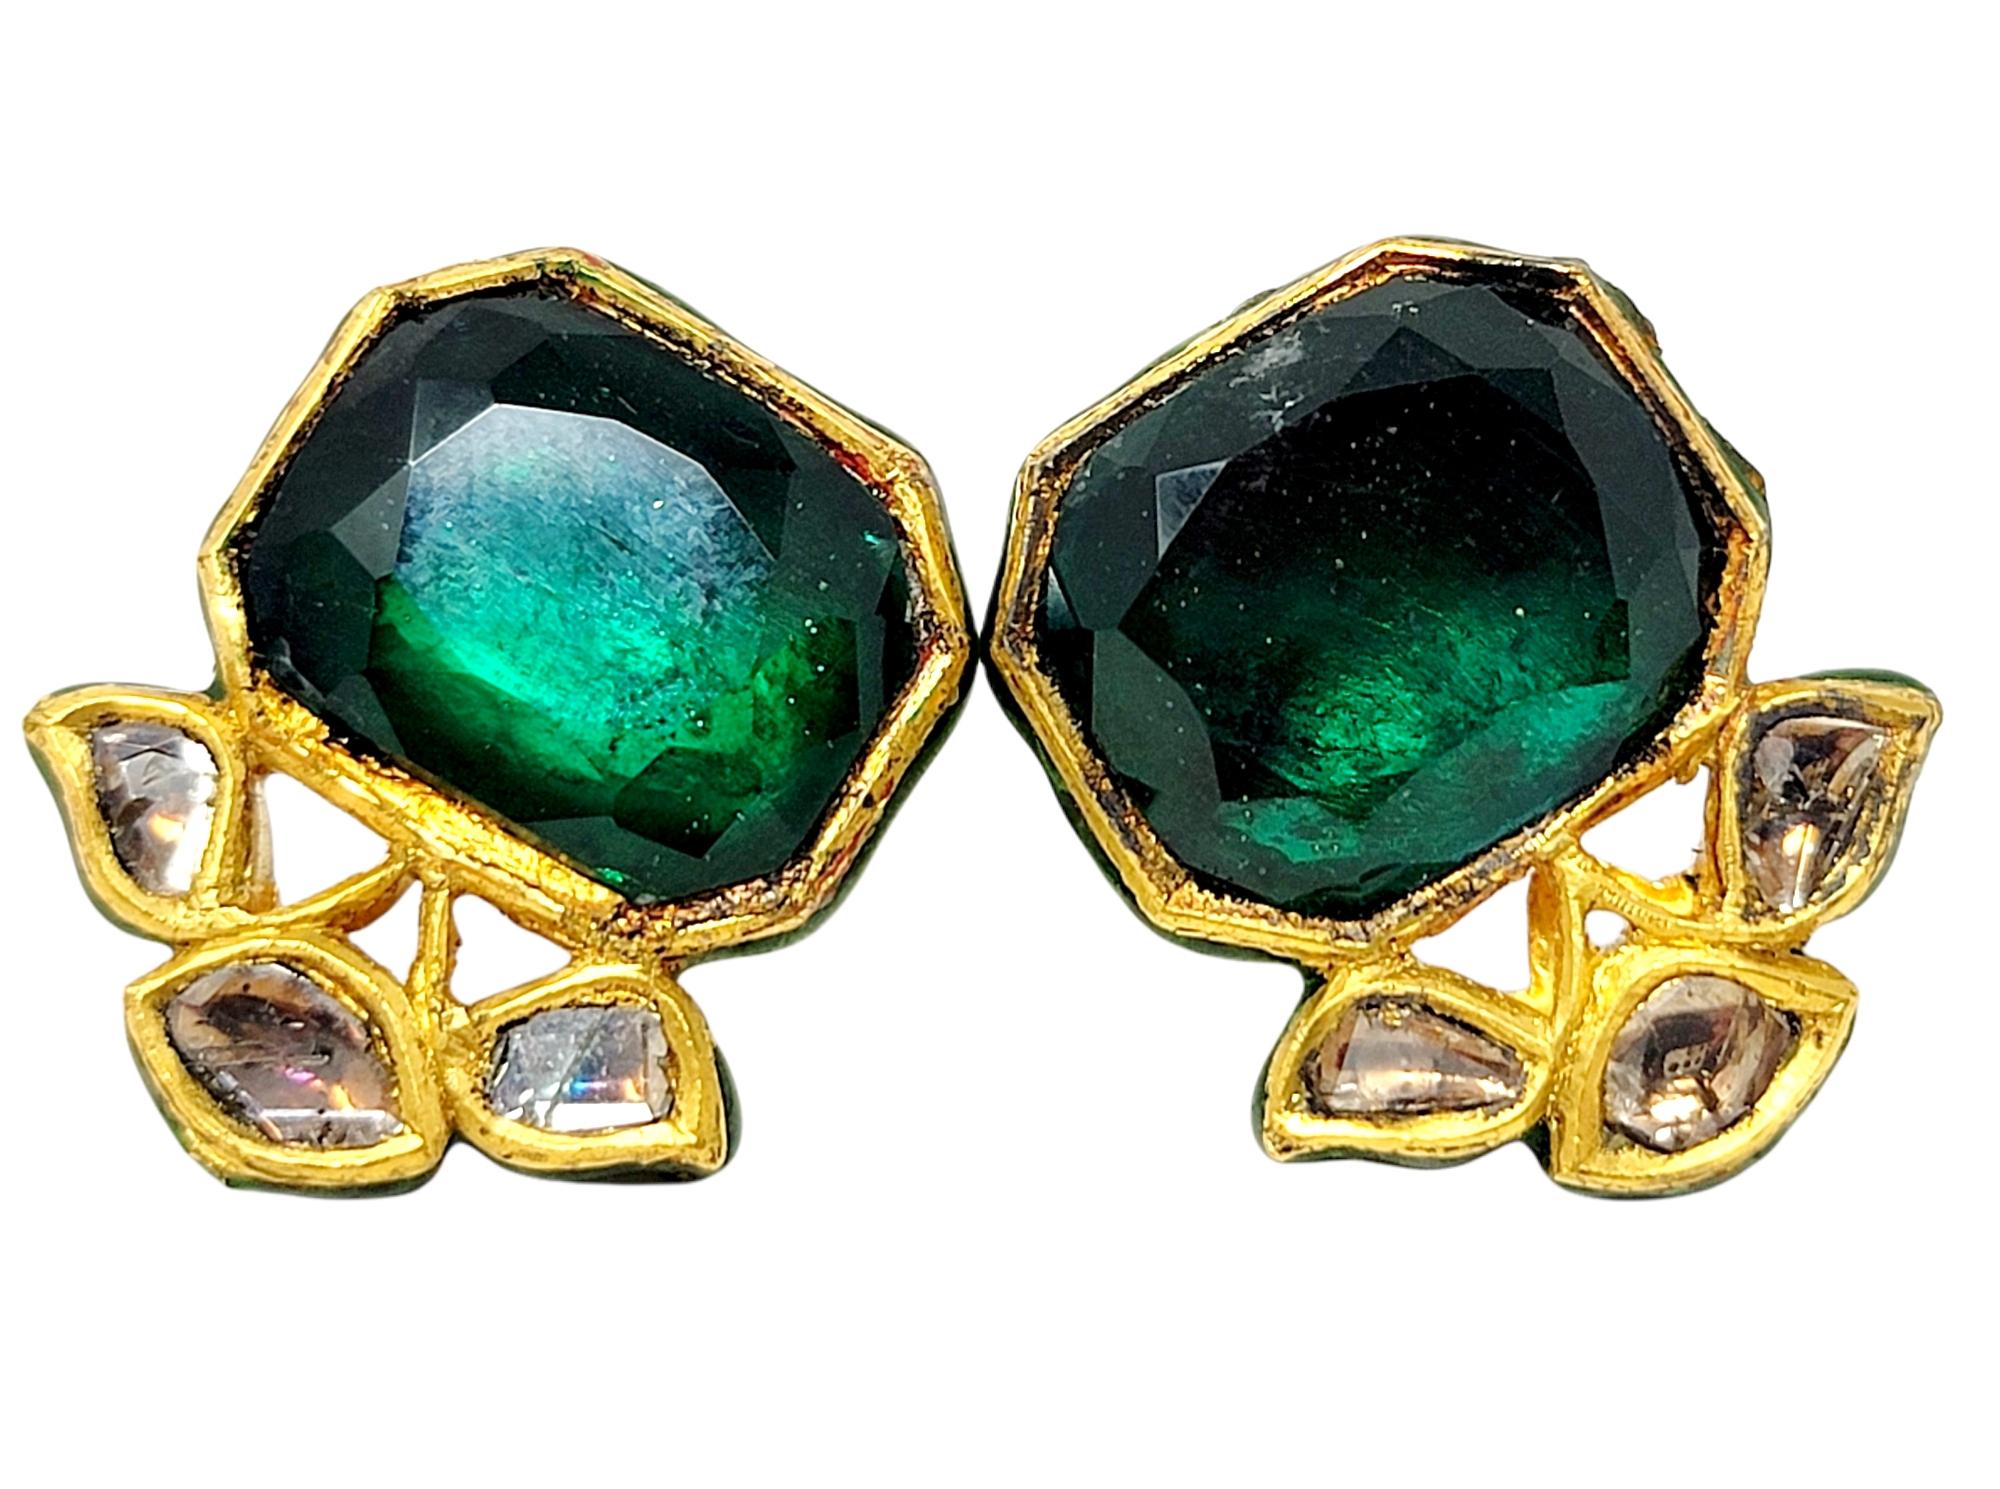 These gorgeous, one-of-a-kind earrings are absolutely beautiful. The bold color of the rich green glass stones really makes a statement, while the natural uncut diamonds add an extra touch of sparkle and glamour. These  pierced-ear earrings each